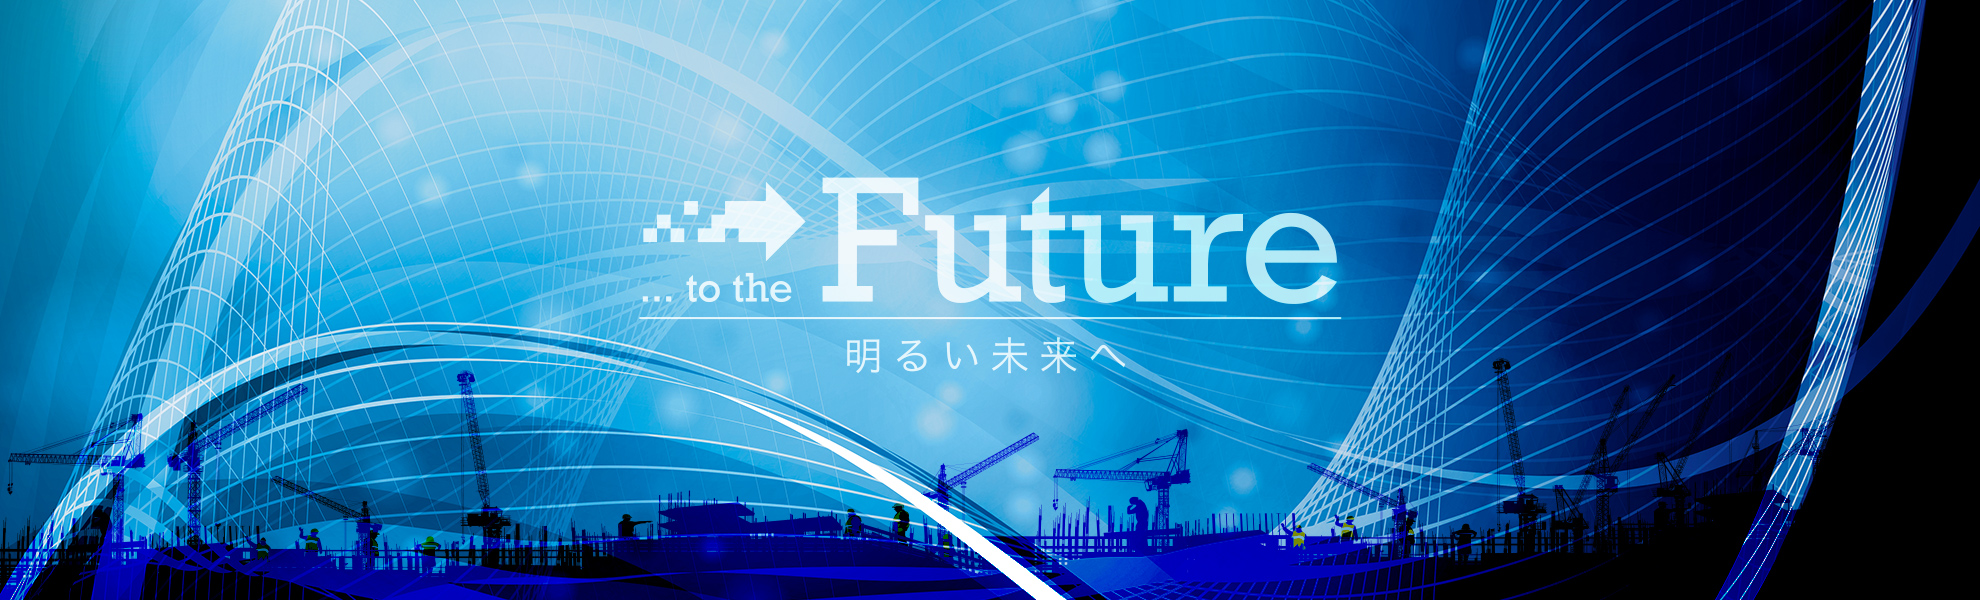 BUILDTECH ｜ .... to the Future　明るい未来へ